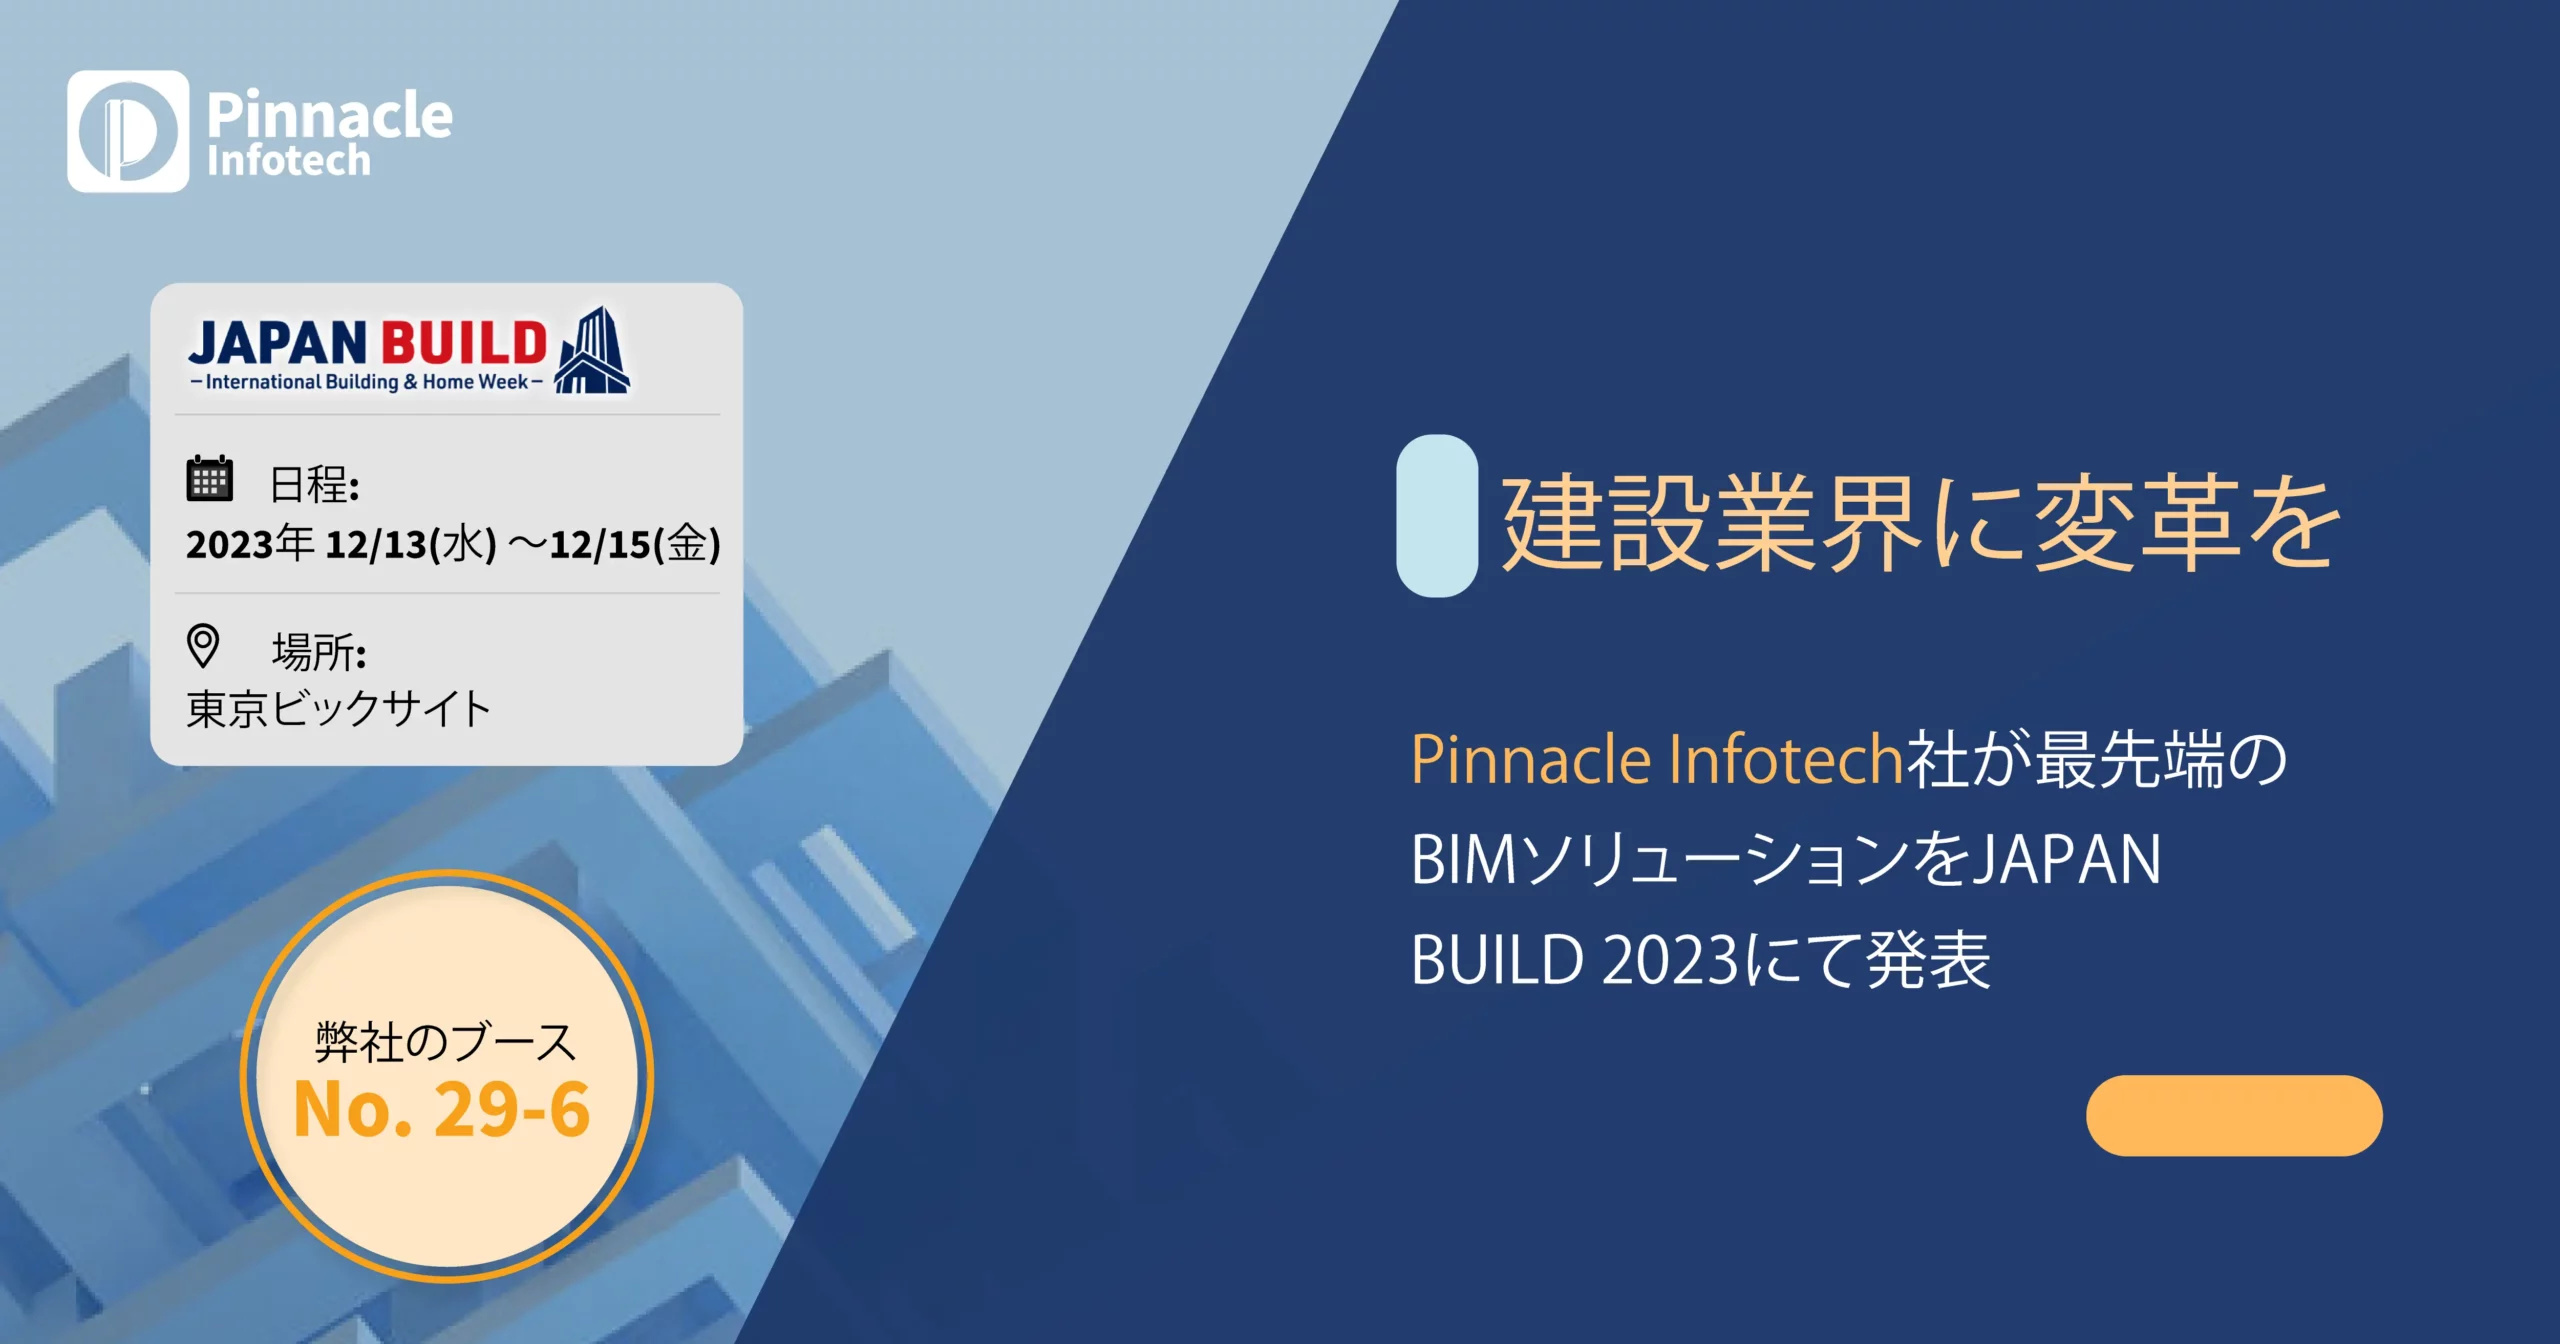 Pinnacle Infotech To Unveil Cutting-Edge BIM Solutions at Japan Build 2023 Cover